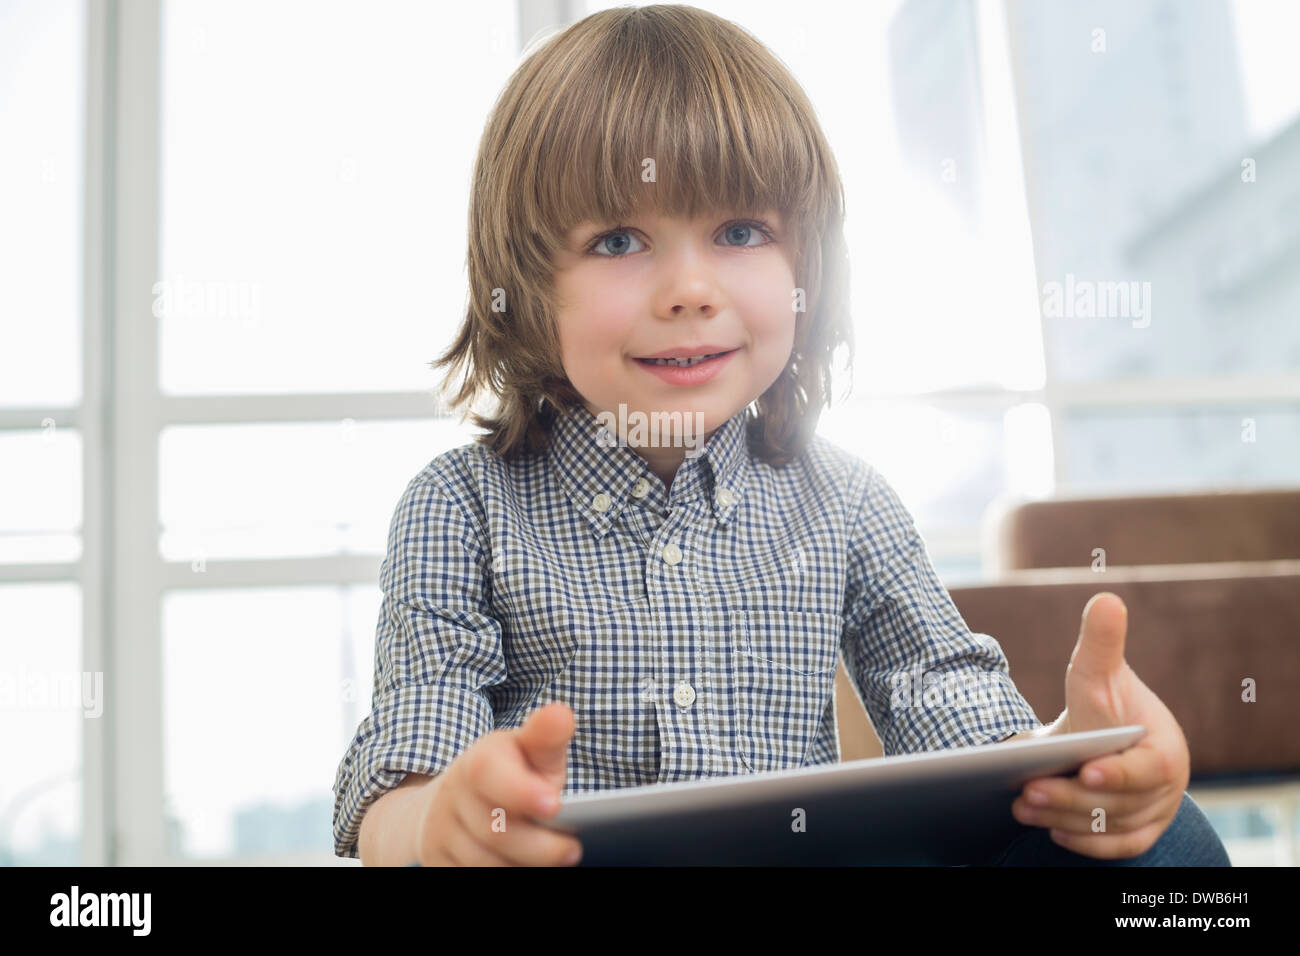 Portrait of cute boy holding tablet computer at home Banque D'Images